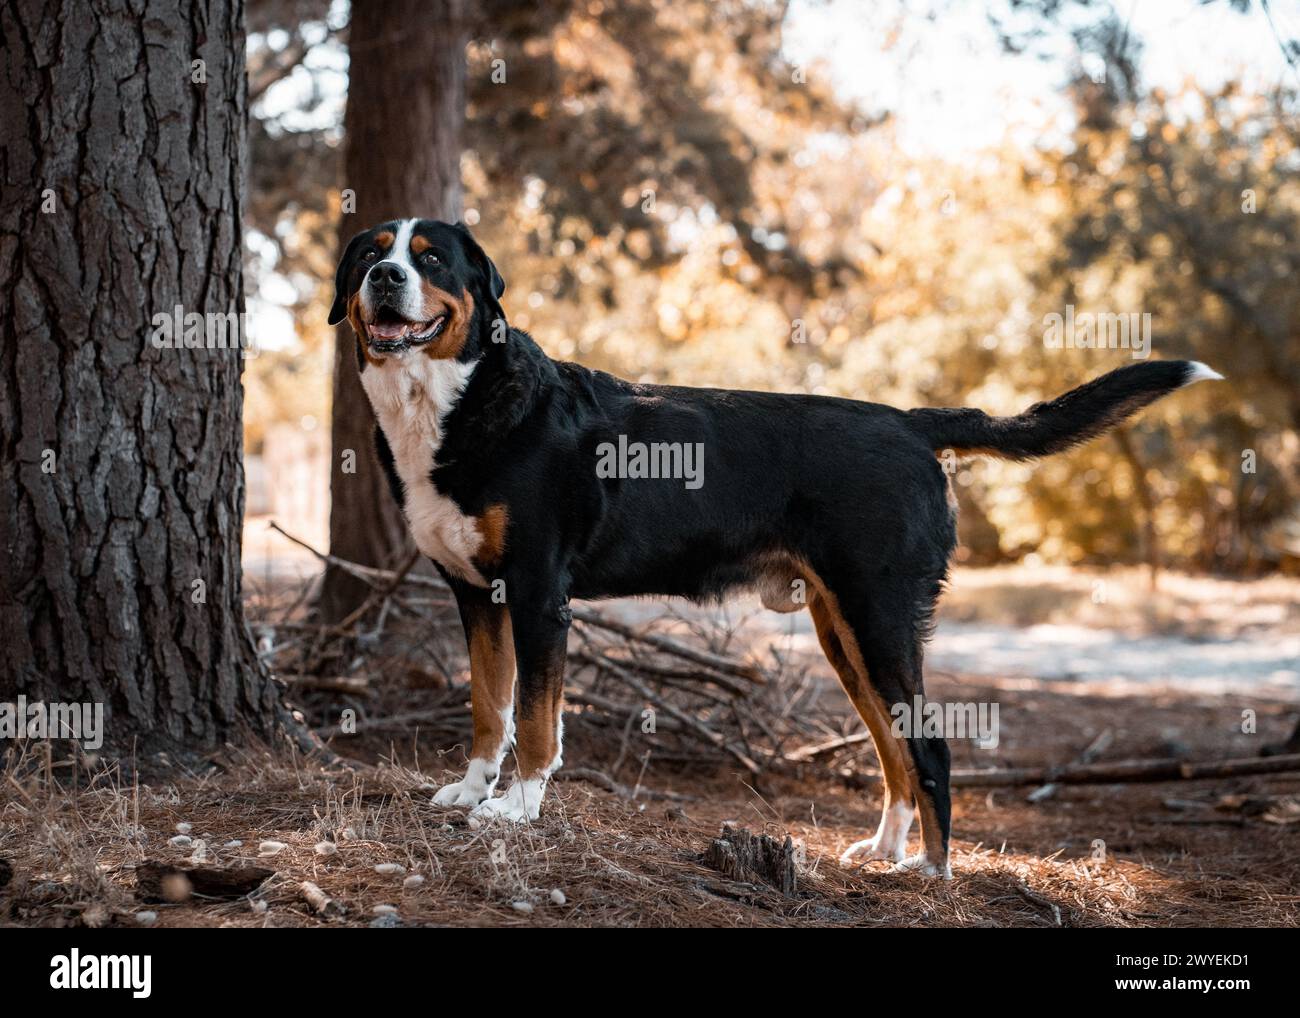 A Greater Swiss Mountain Dog in a forest Stock Photo